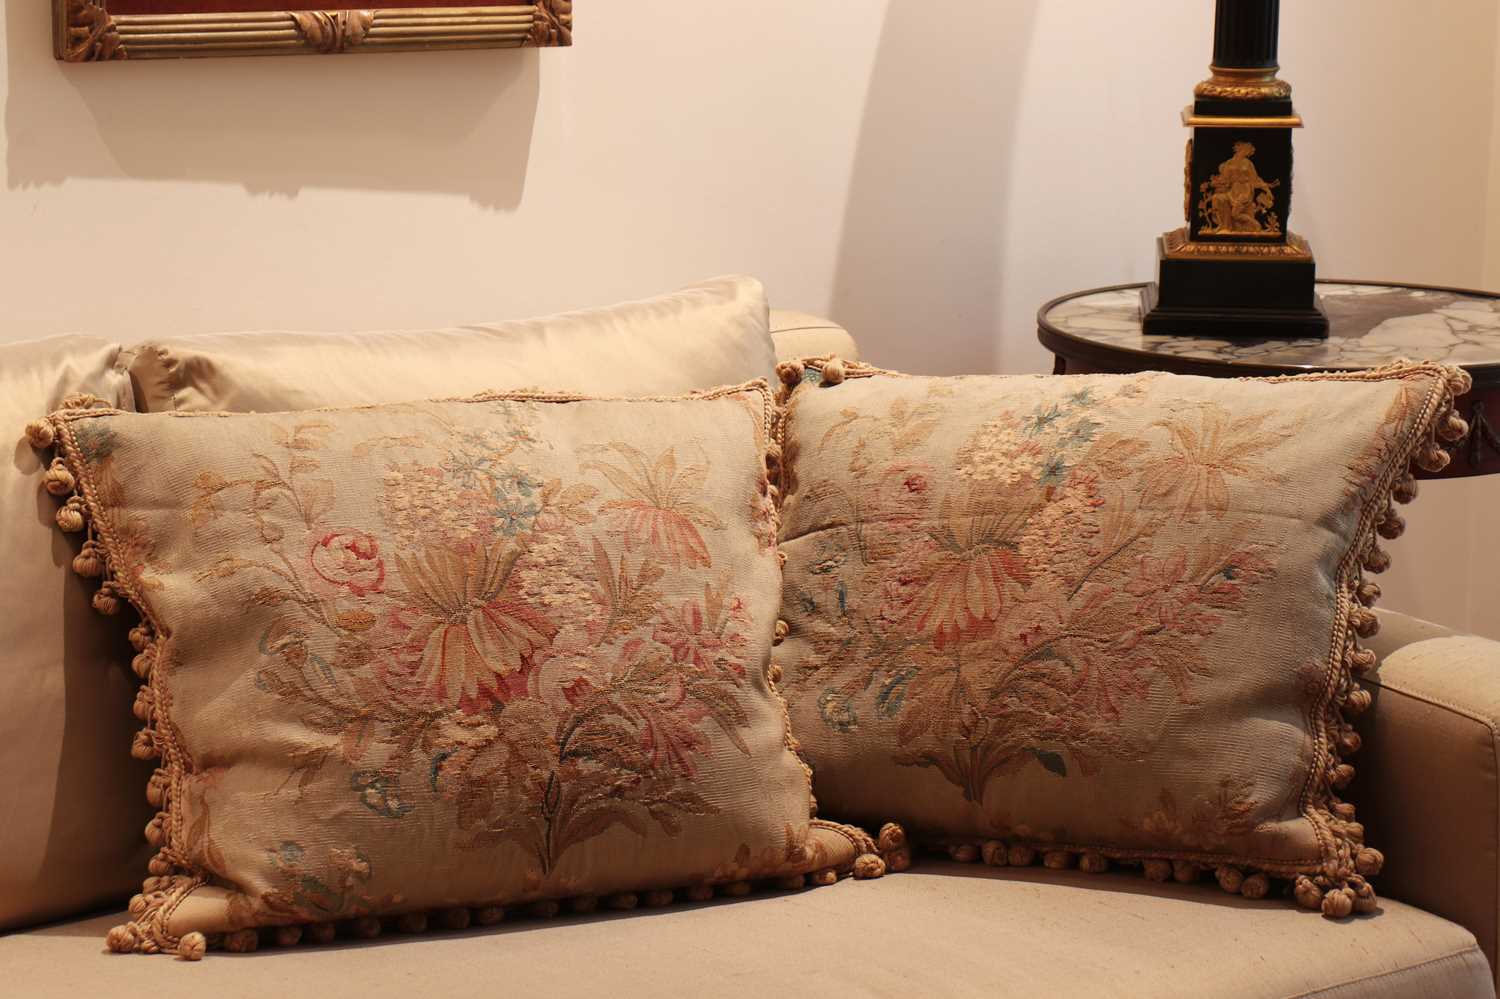 Lot 267 - A pair of Aubusson cushions